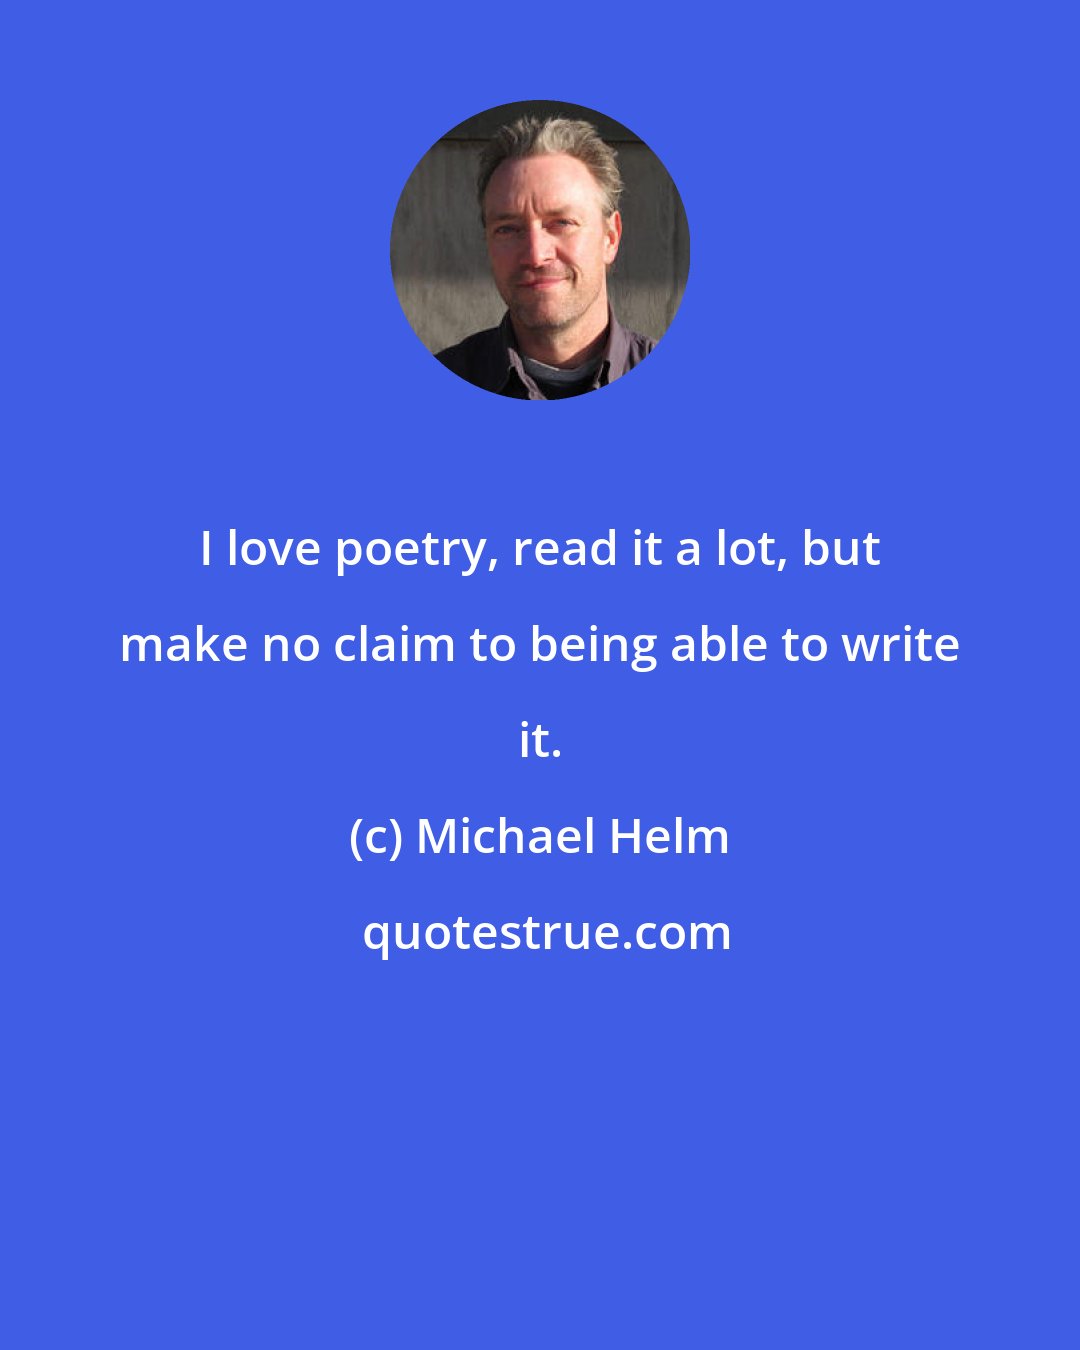 Michael Helm: I love poetry, read it a lot, but make no claim to being able to write it.